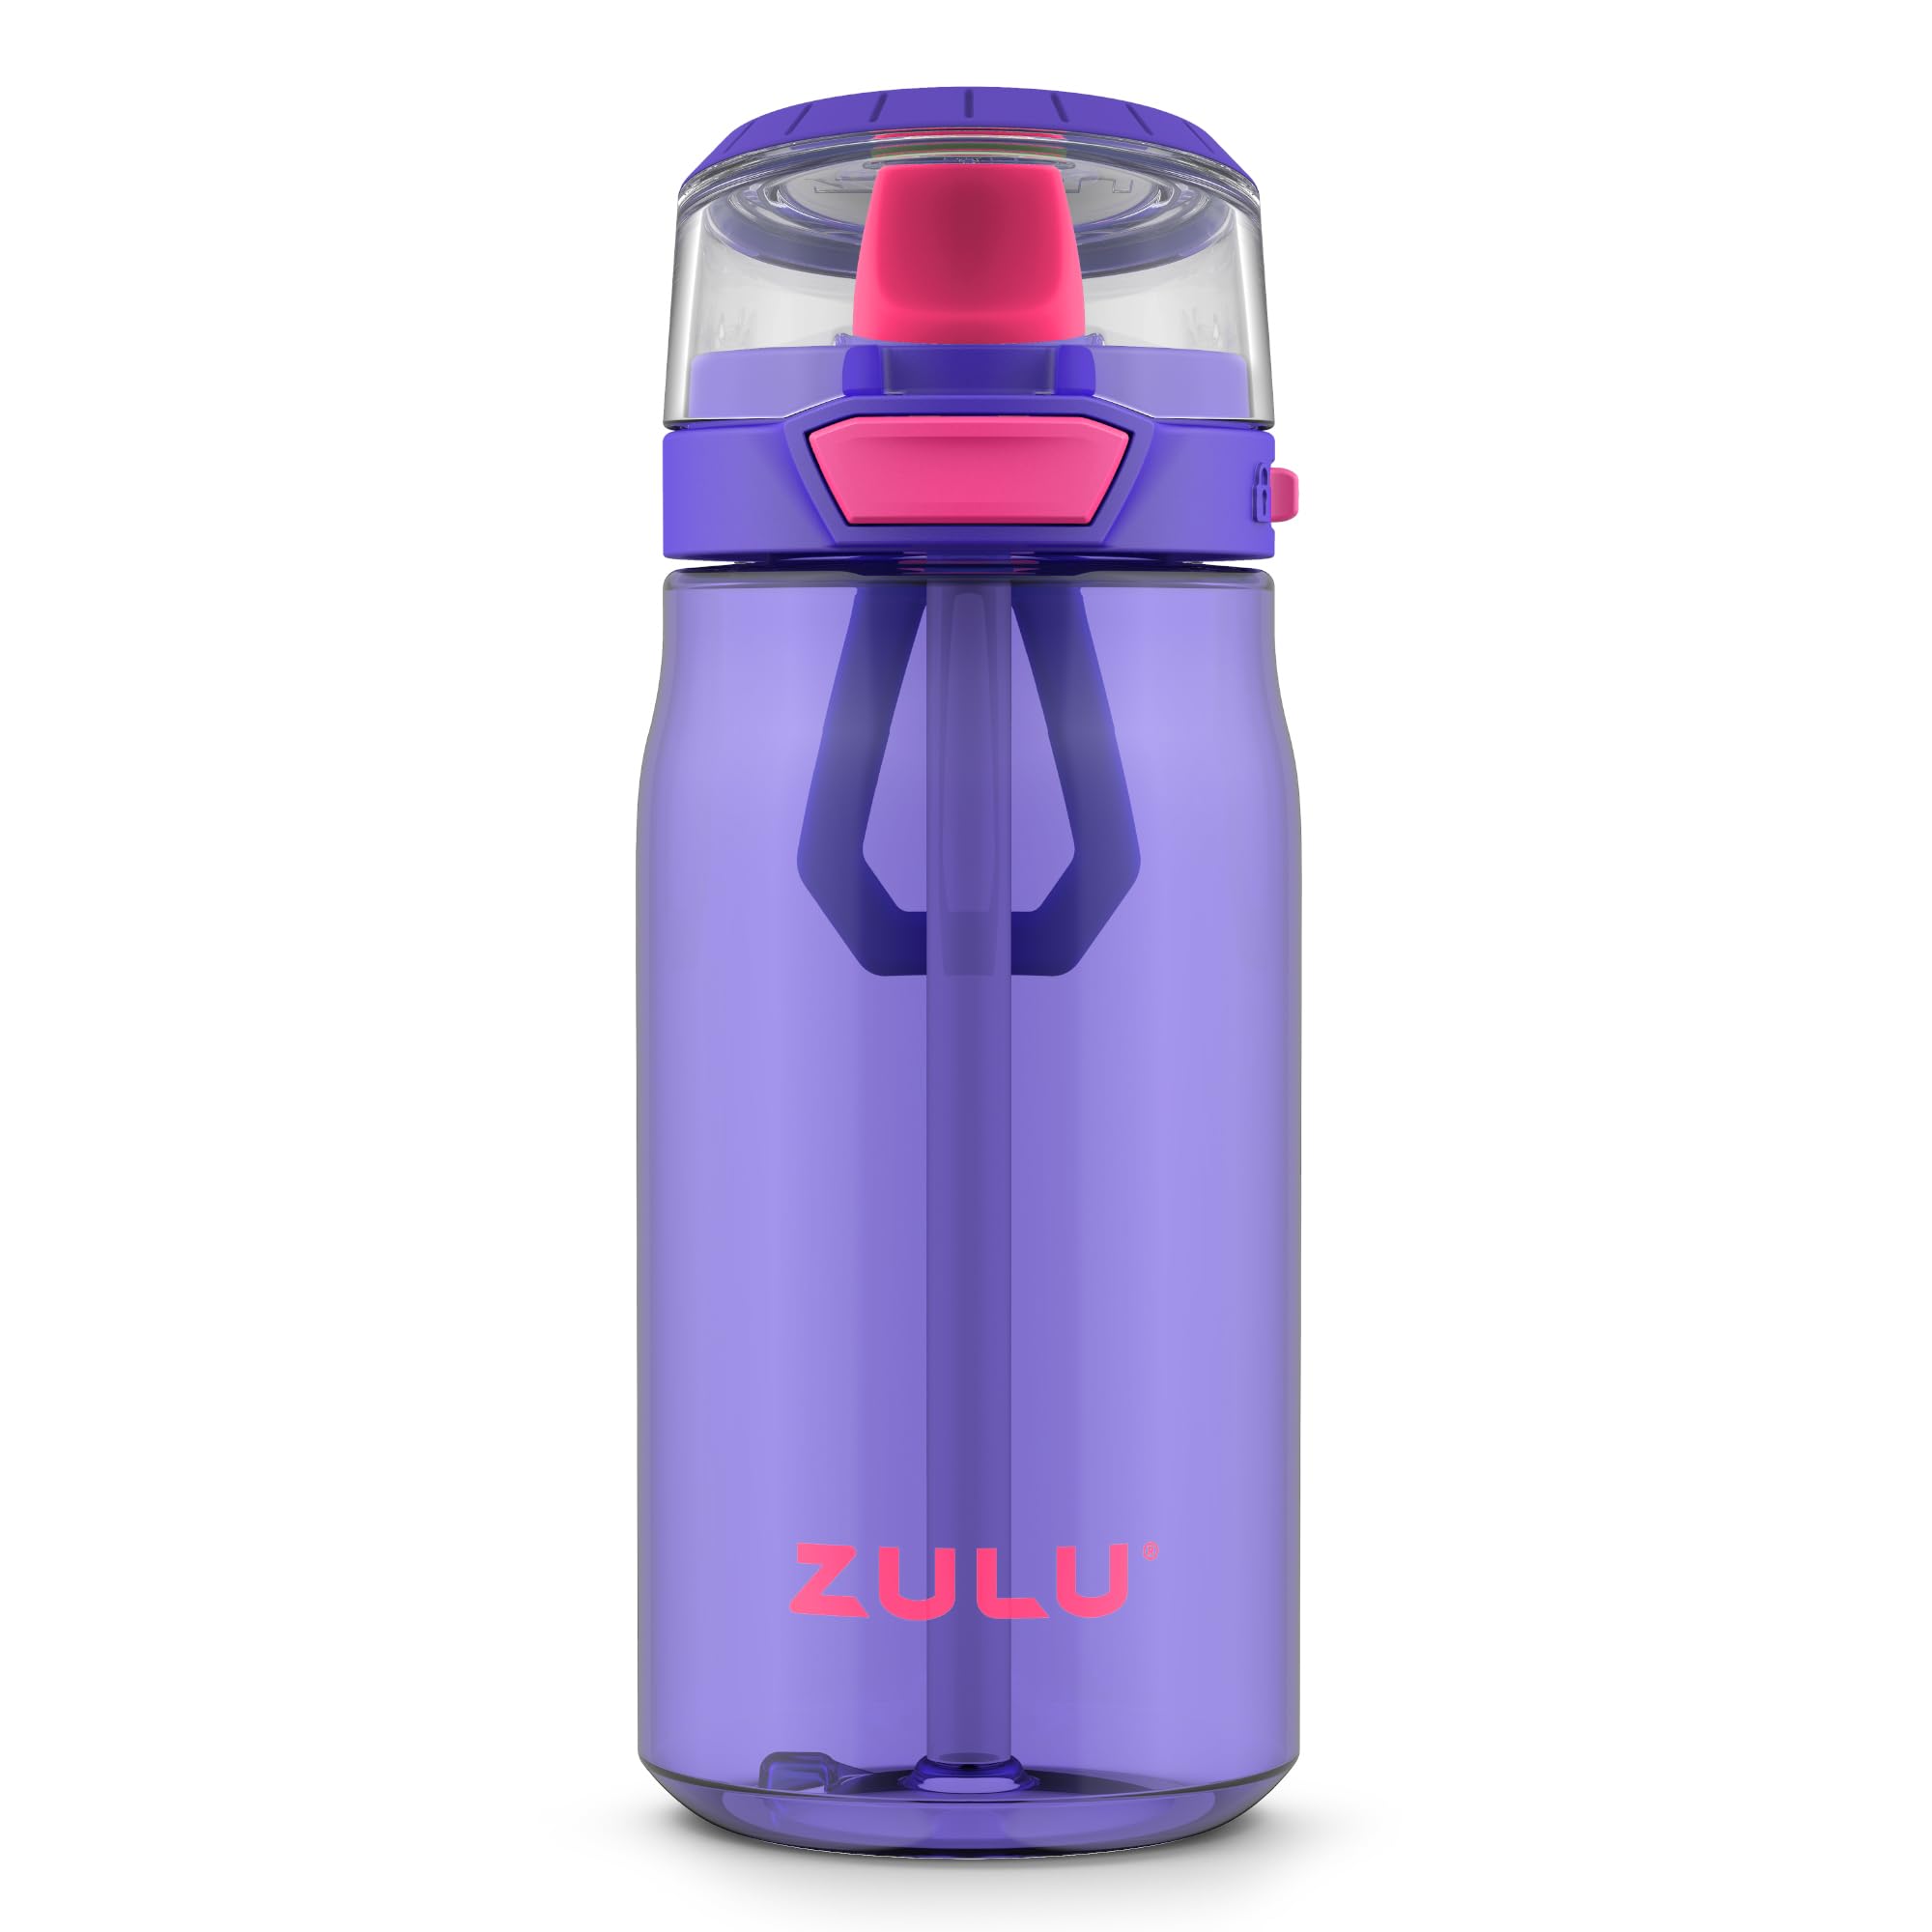 ZULU Kids Flex 16oz Tritan Plastic Water Bottle with Silicone Spout, Leak-Proof Locking Flip Lid and Soft Touch Carry Loop for S